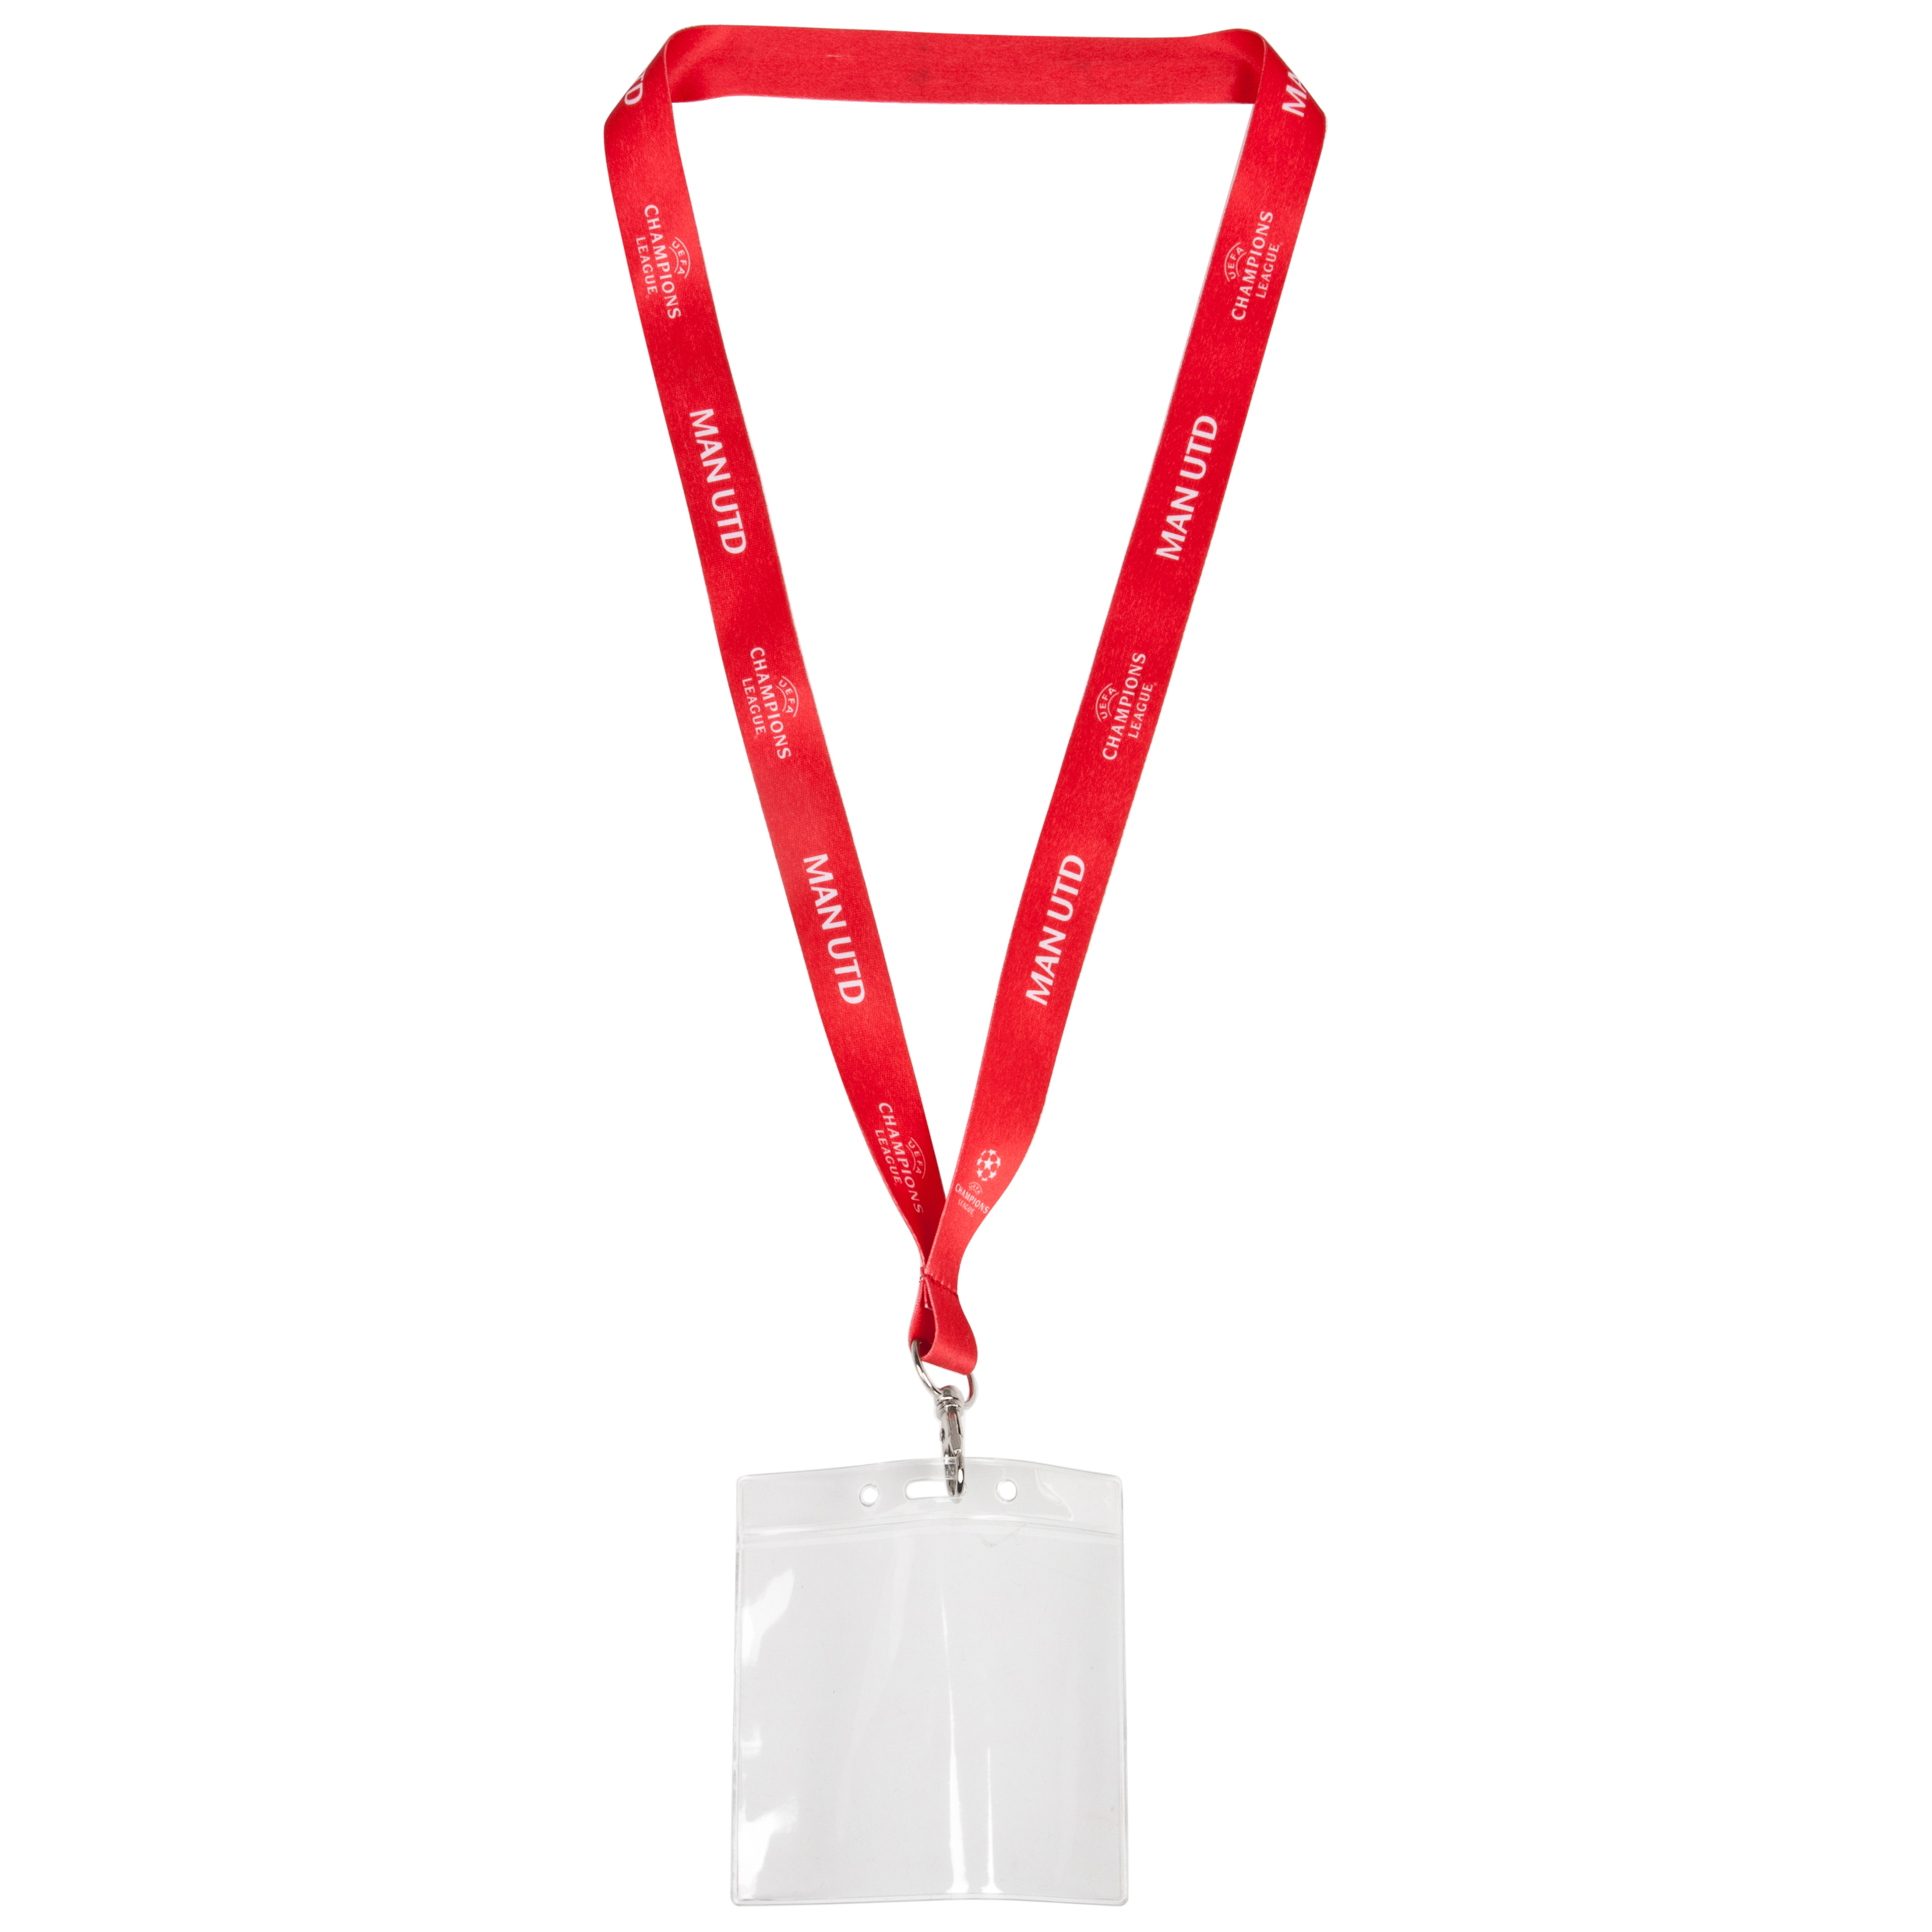 Manchester United Champions League Lanyard Ticket Holder - Red